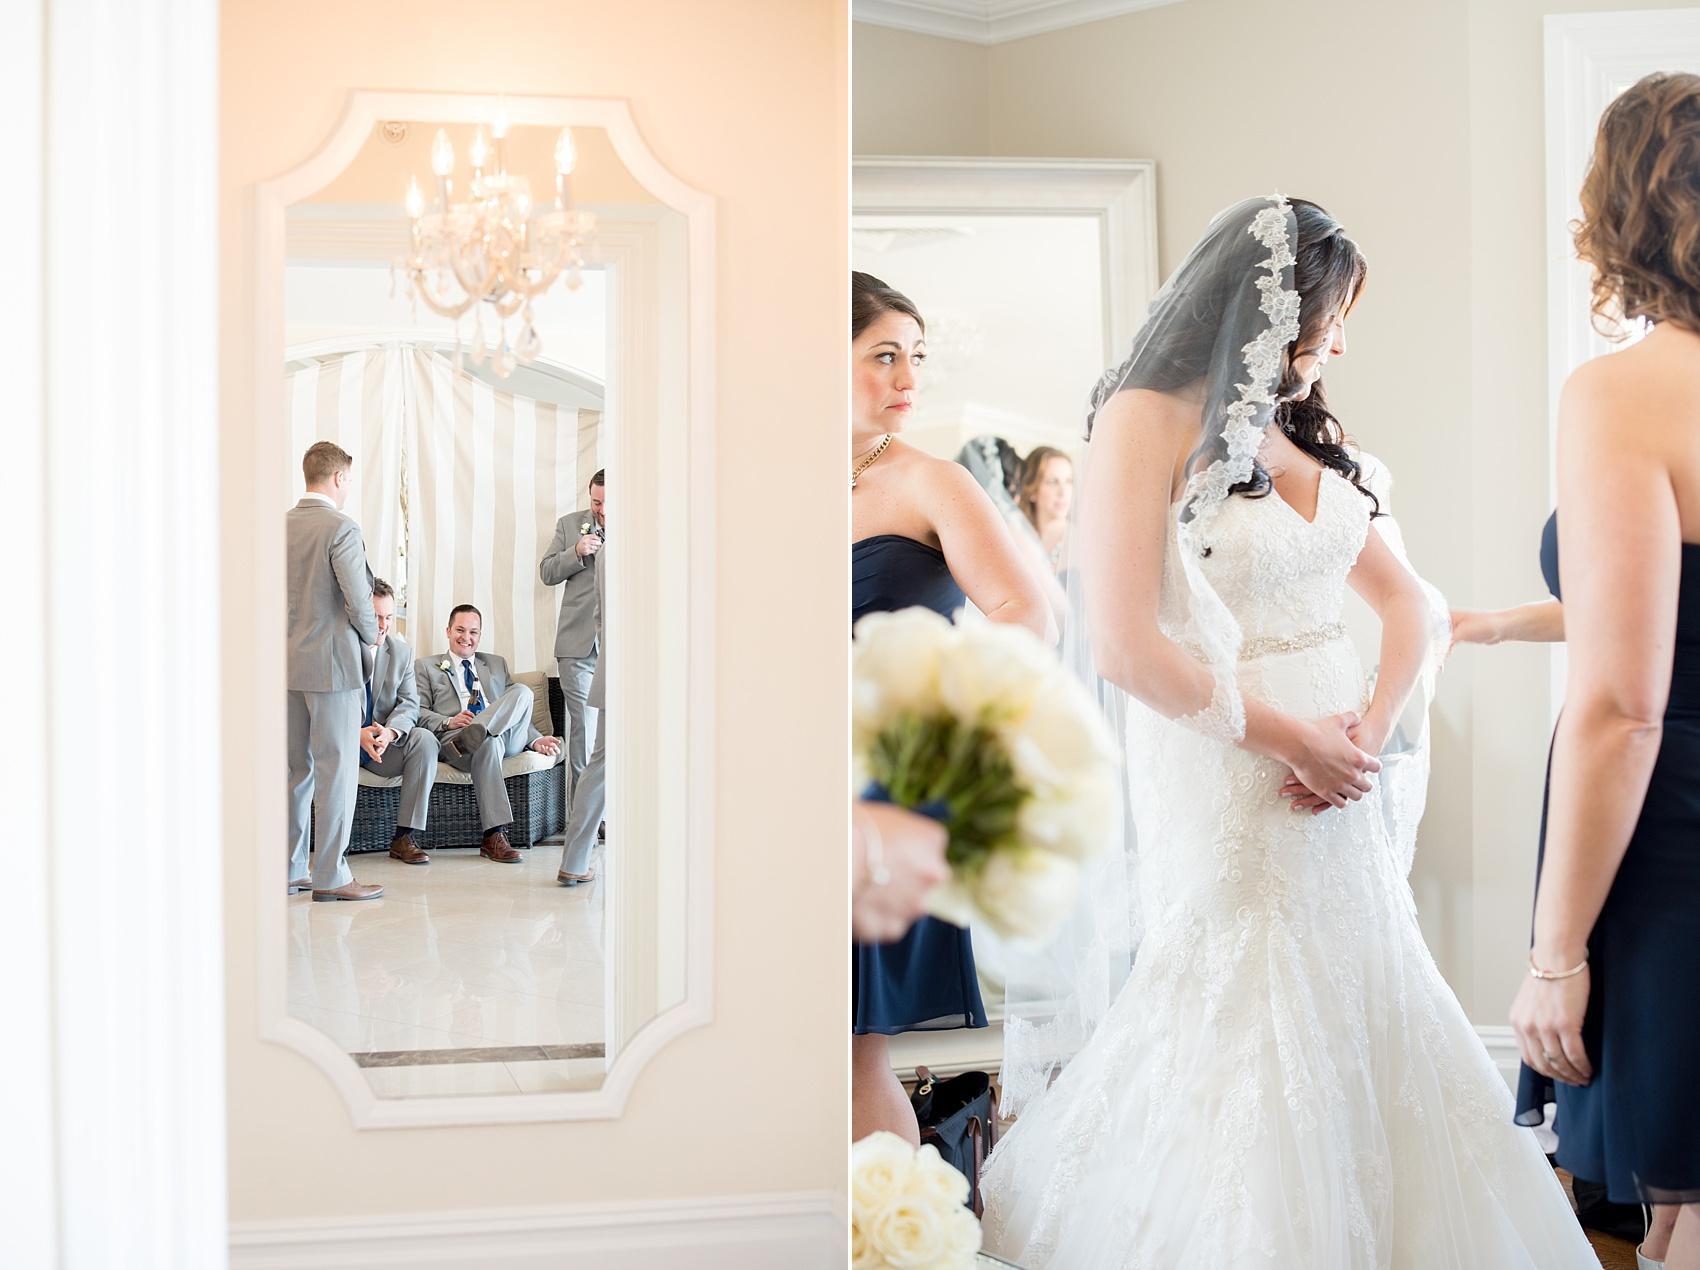 Photo by Mikkel Paige photography. Windows on the Water wedding preparation in the bridal suite with lace-edged veil.